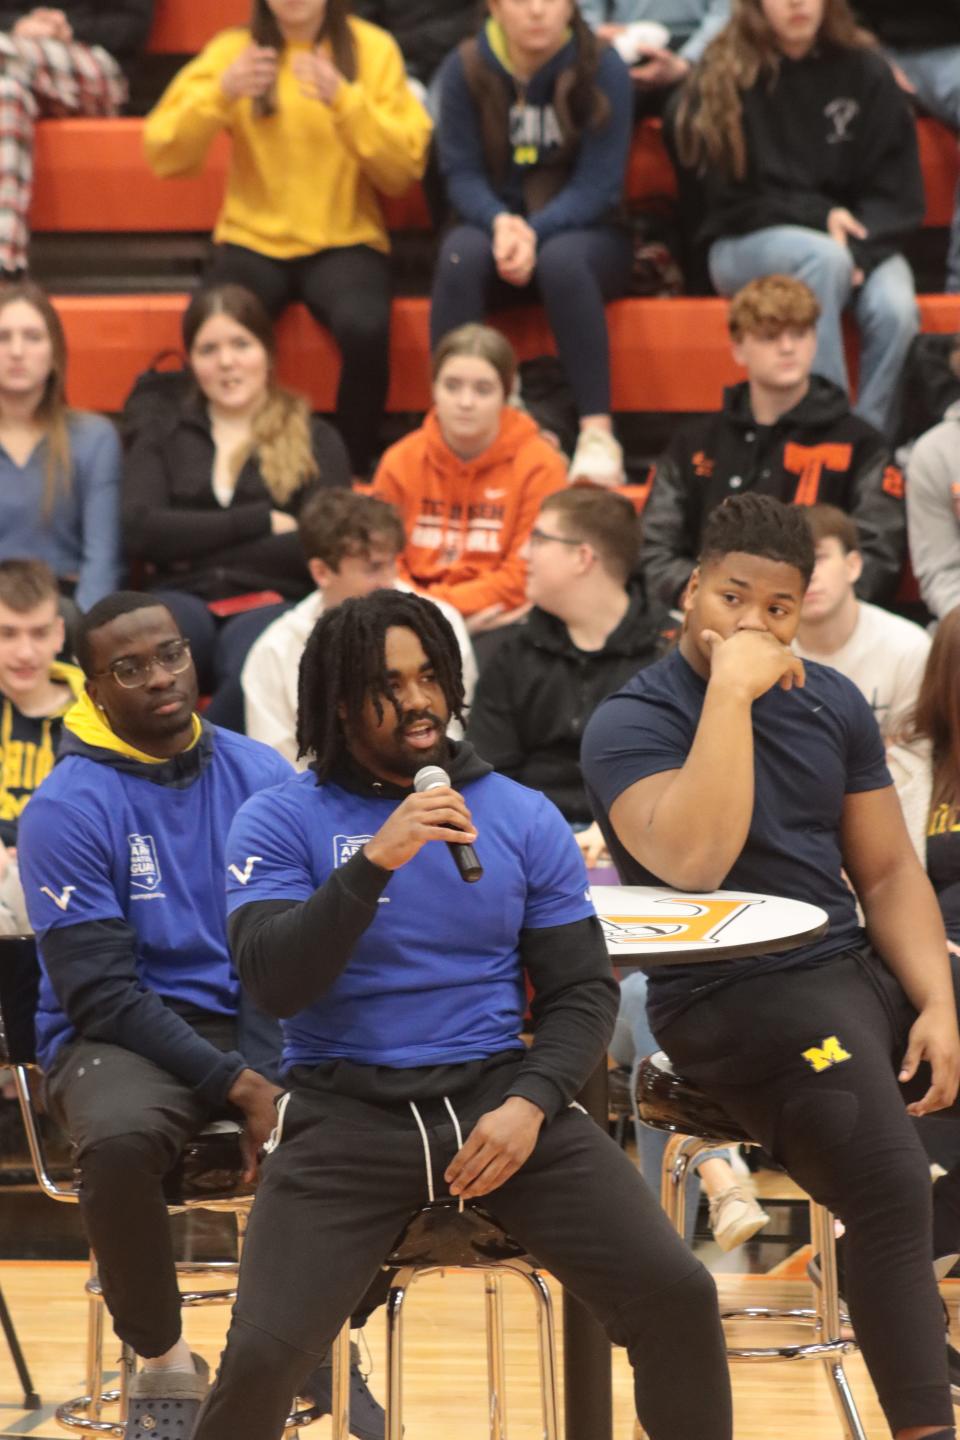 Donovan Edwards, a running back on the University of Michigan football team, answers a question during an assembly Friday, March 24, 2023, at Tecumseh High School with the Michigan Army National Guard and University of Michigan student-athletes. Seated behind Edwards are defensive back Mike Sainristil, left, and defensive lineman Kris Jenkins.